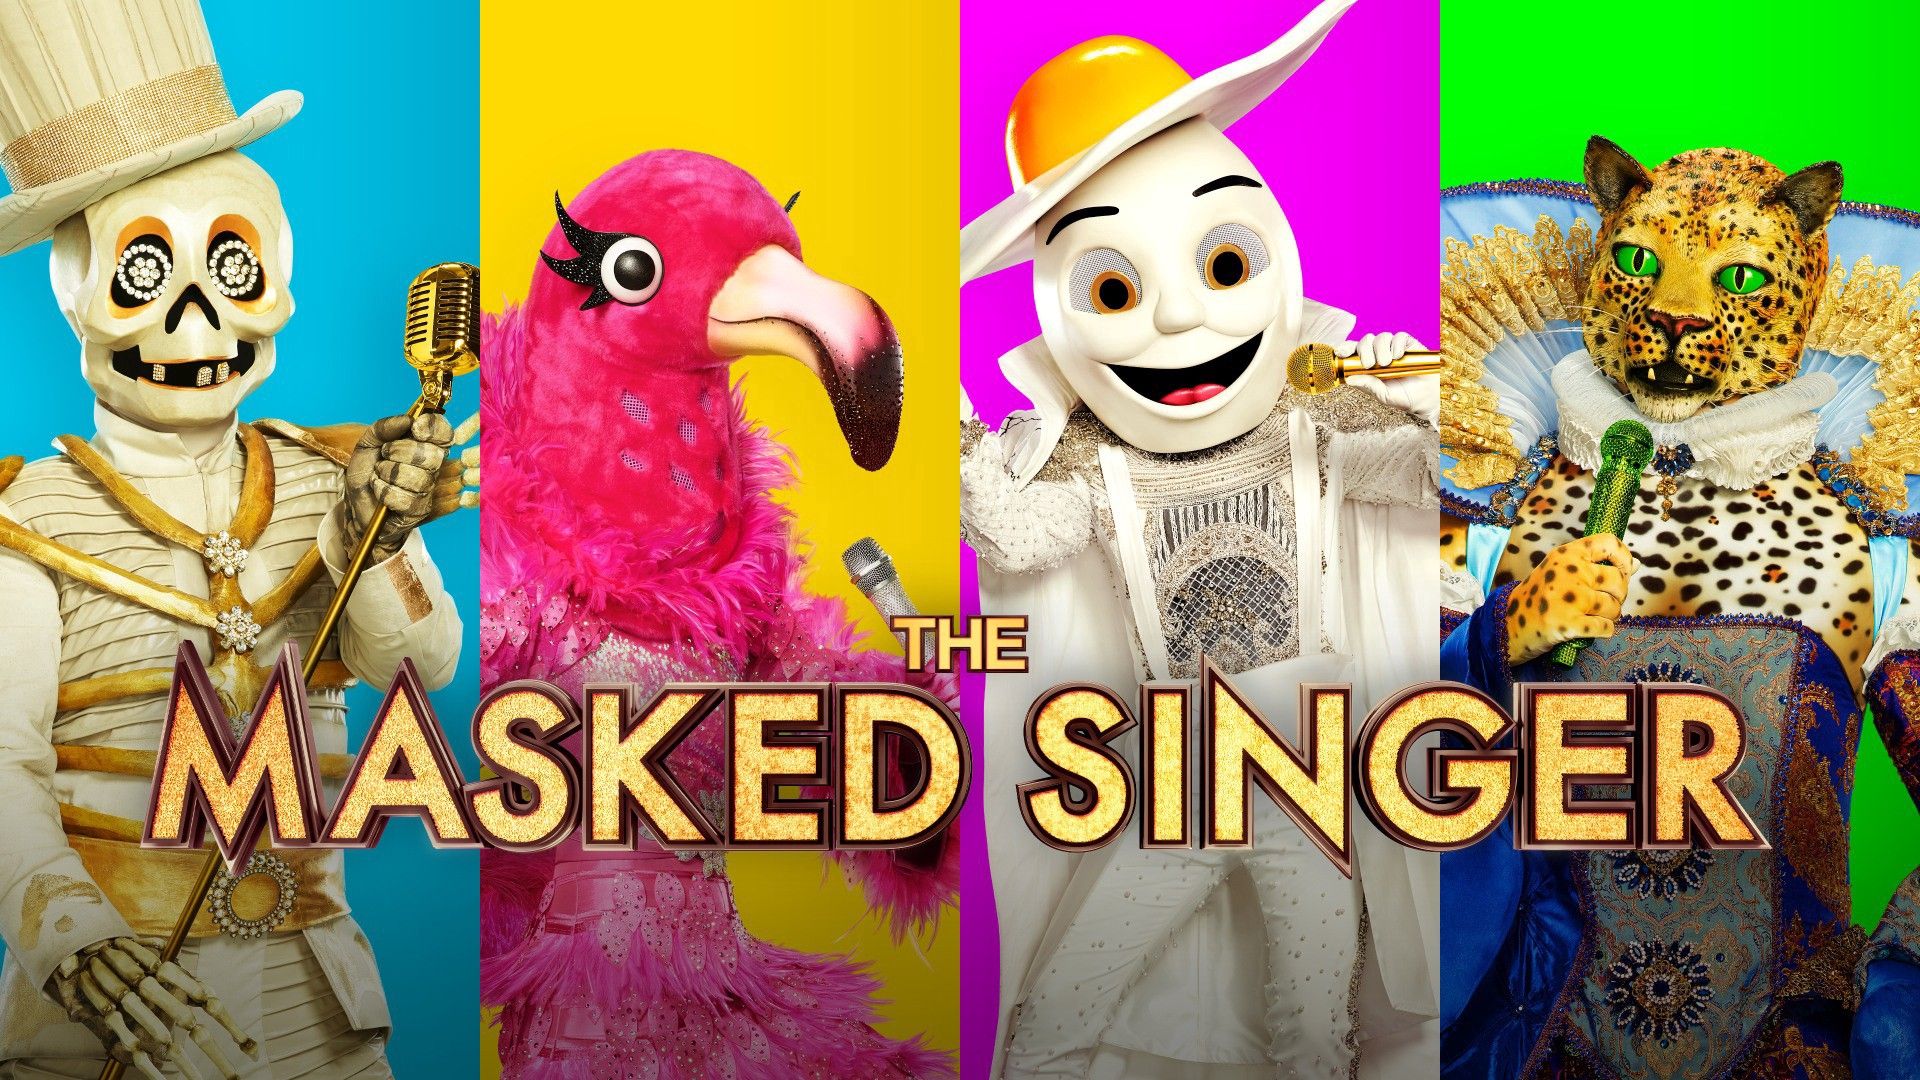 Watch The Masked Singer, S2E1